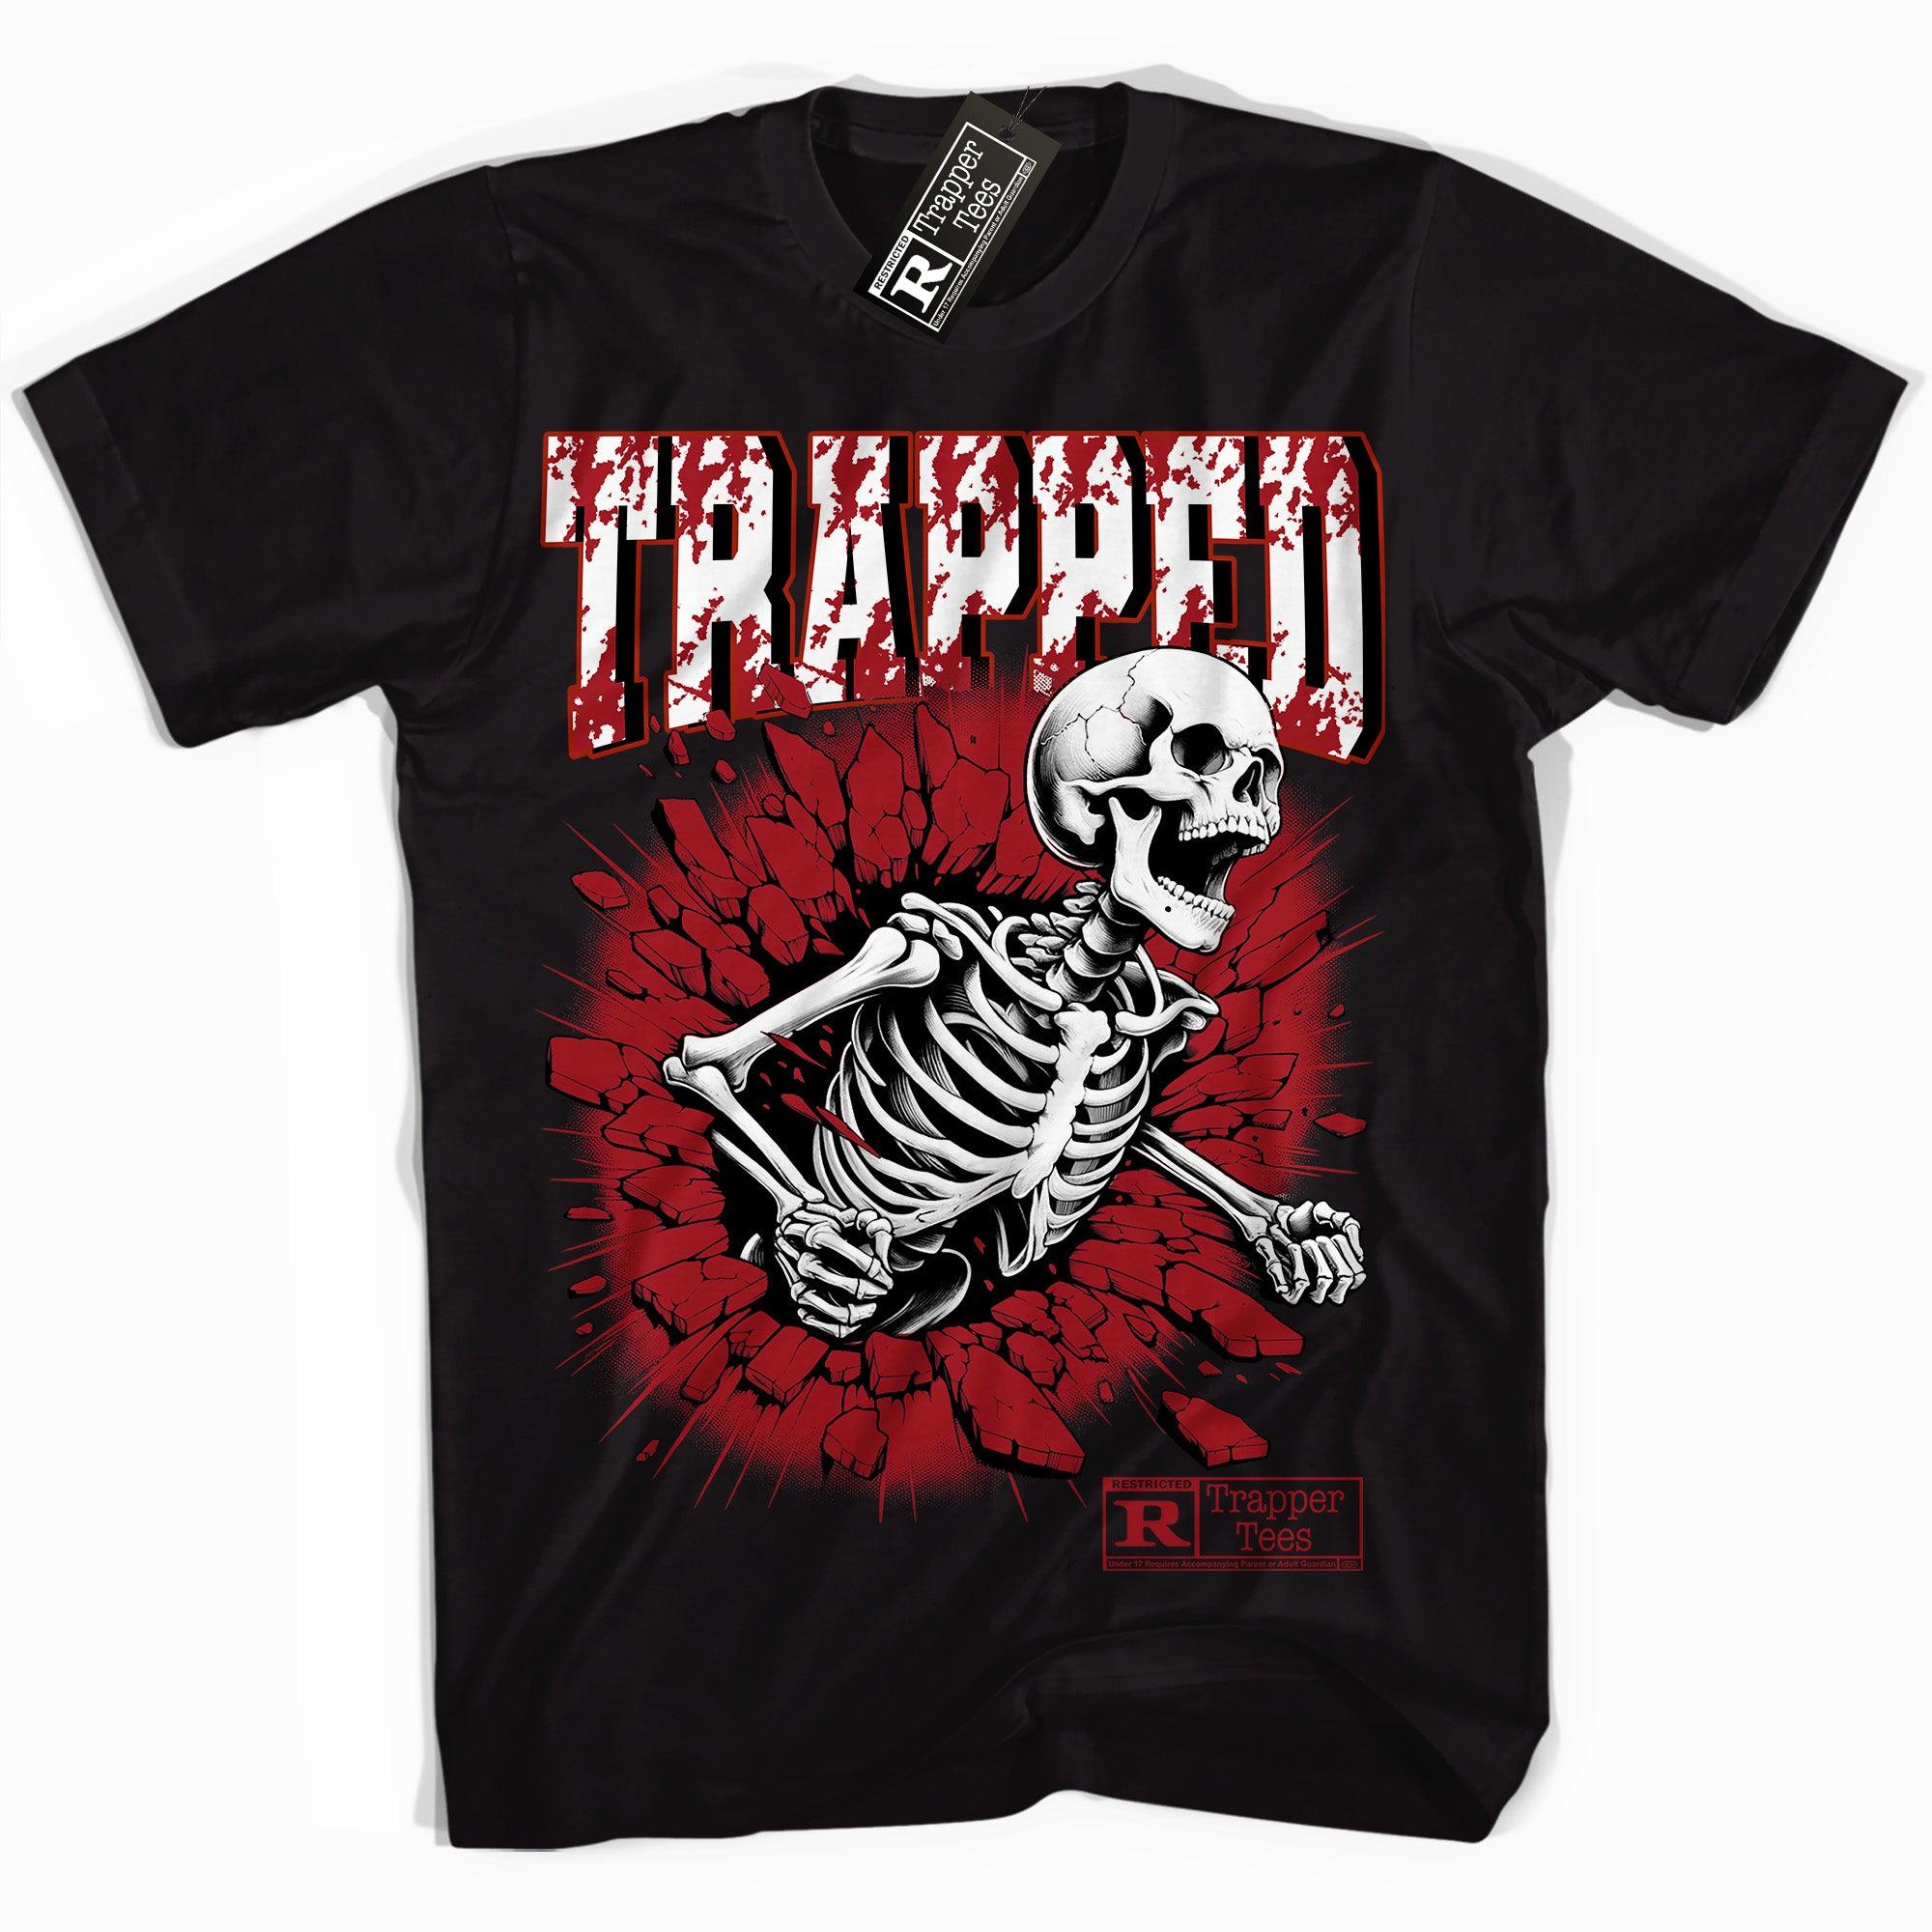 Cool Black graphic tee with “ Trapped Skull ” print, that perfectly matches Air Jordan 12 Cherry sneakers 